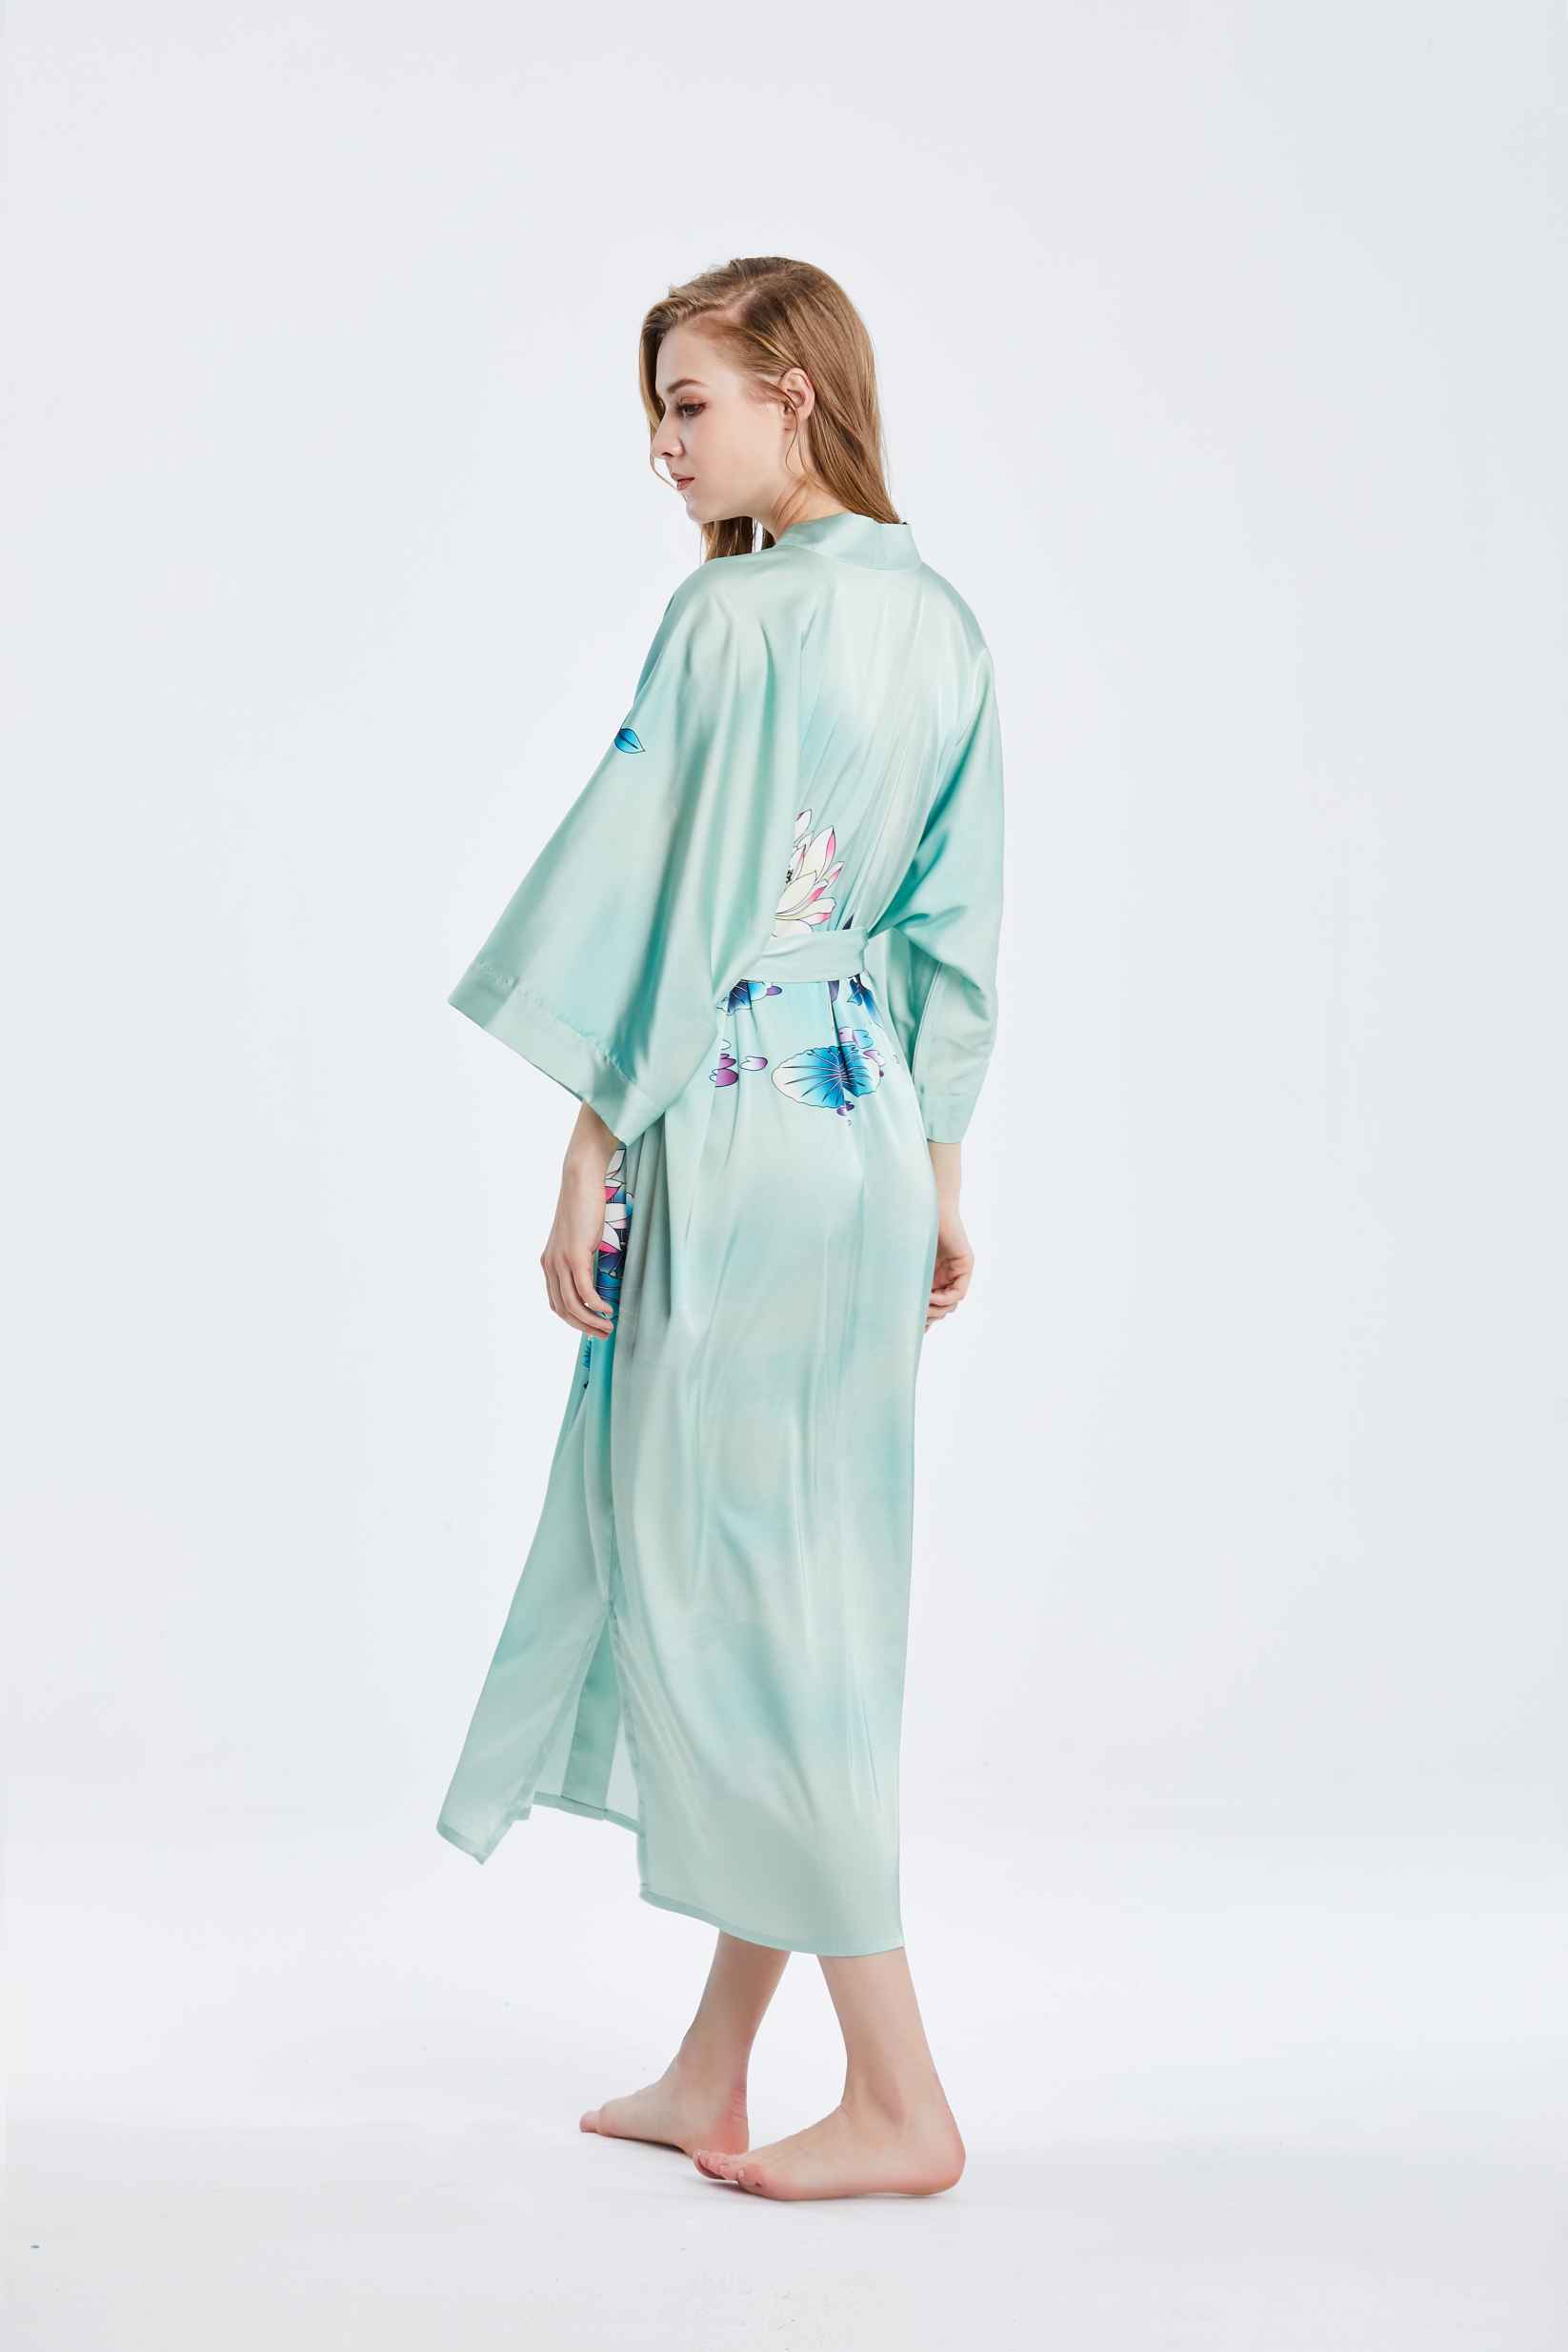 Best Ladies Real Silk Green Kimono Robe Nightgown Loungewear with Print Factory Wholesale